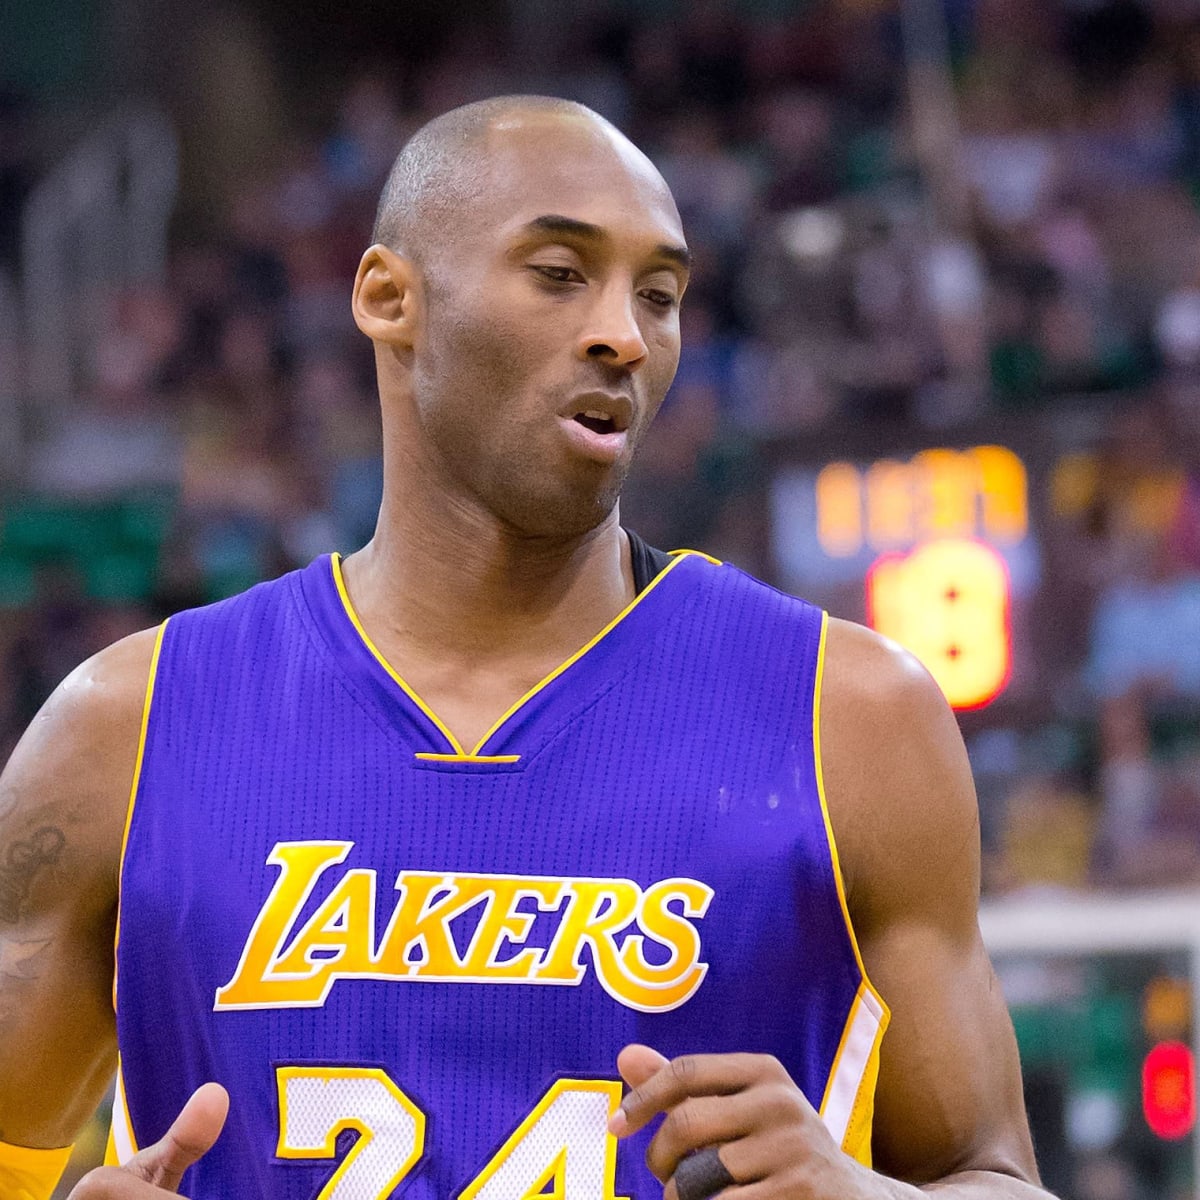 Kobe Bryant rookie card sells for nearly $1.8 million - Sports Illustrated